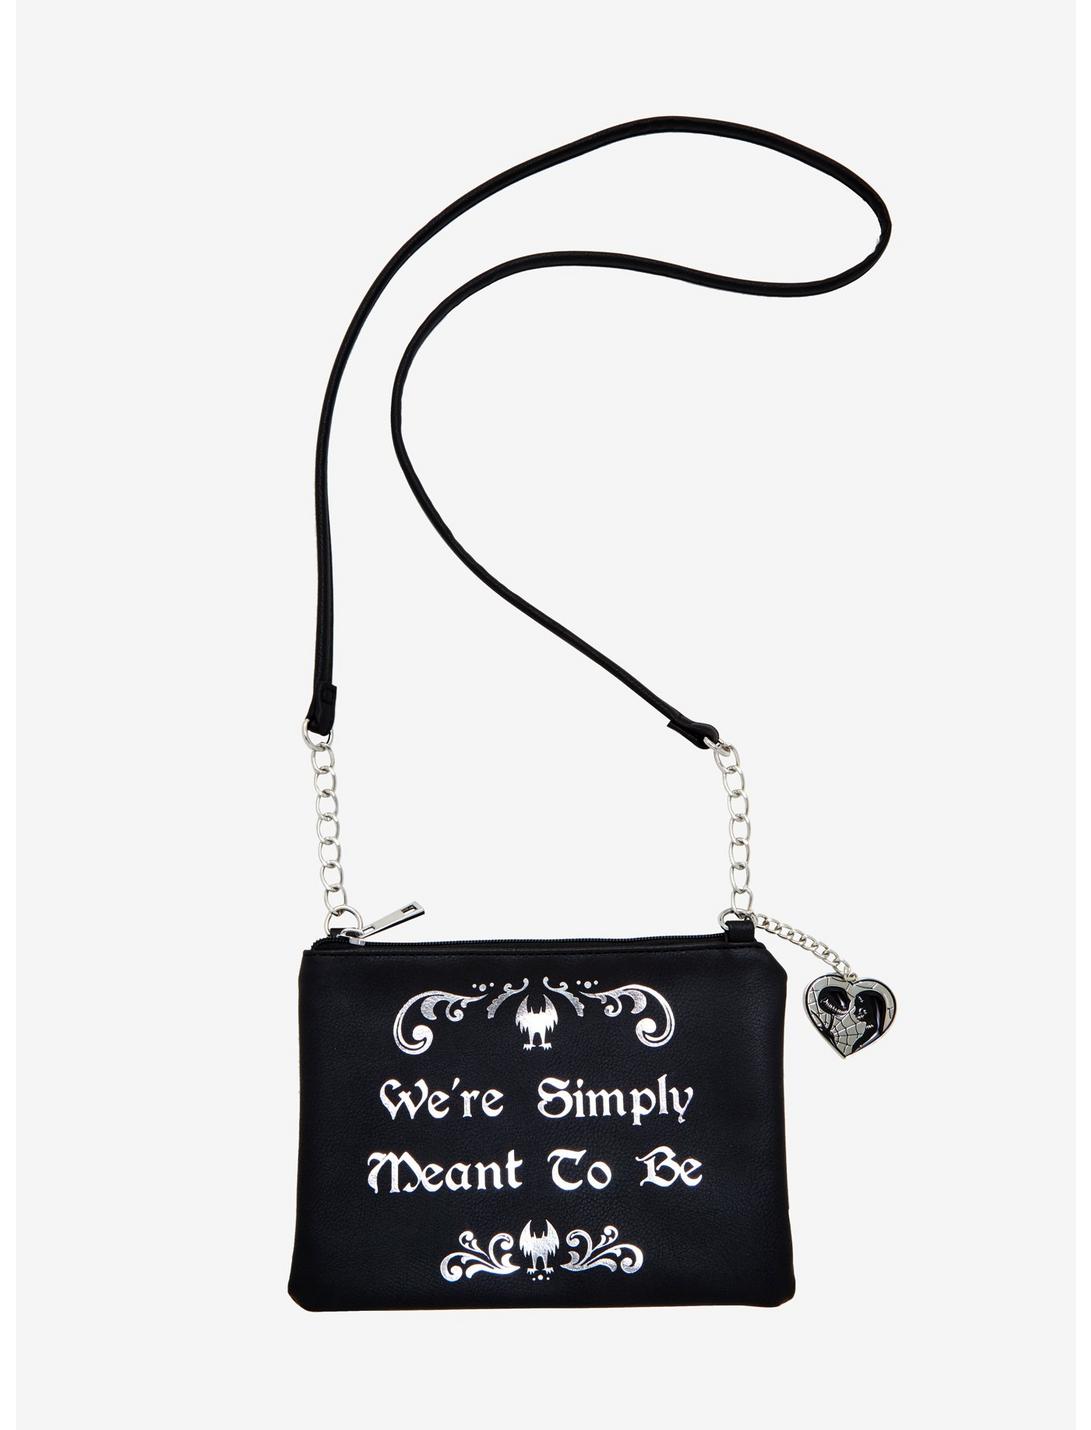 The Nightmare Before Christmas Meant To Be Crossbody Bag, , hi-res